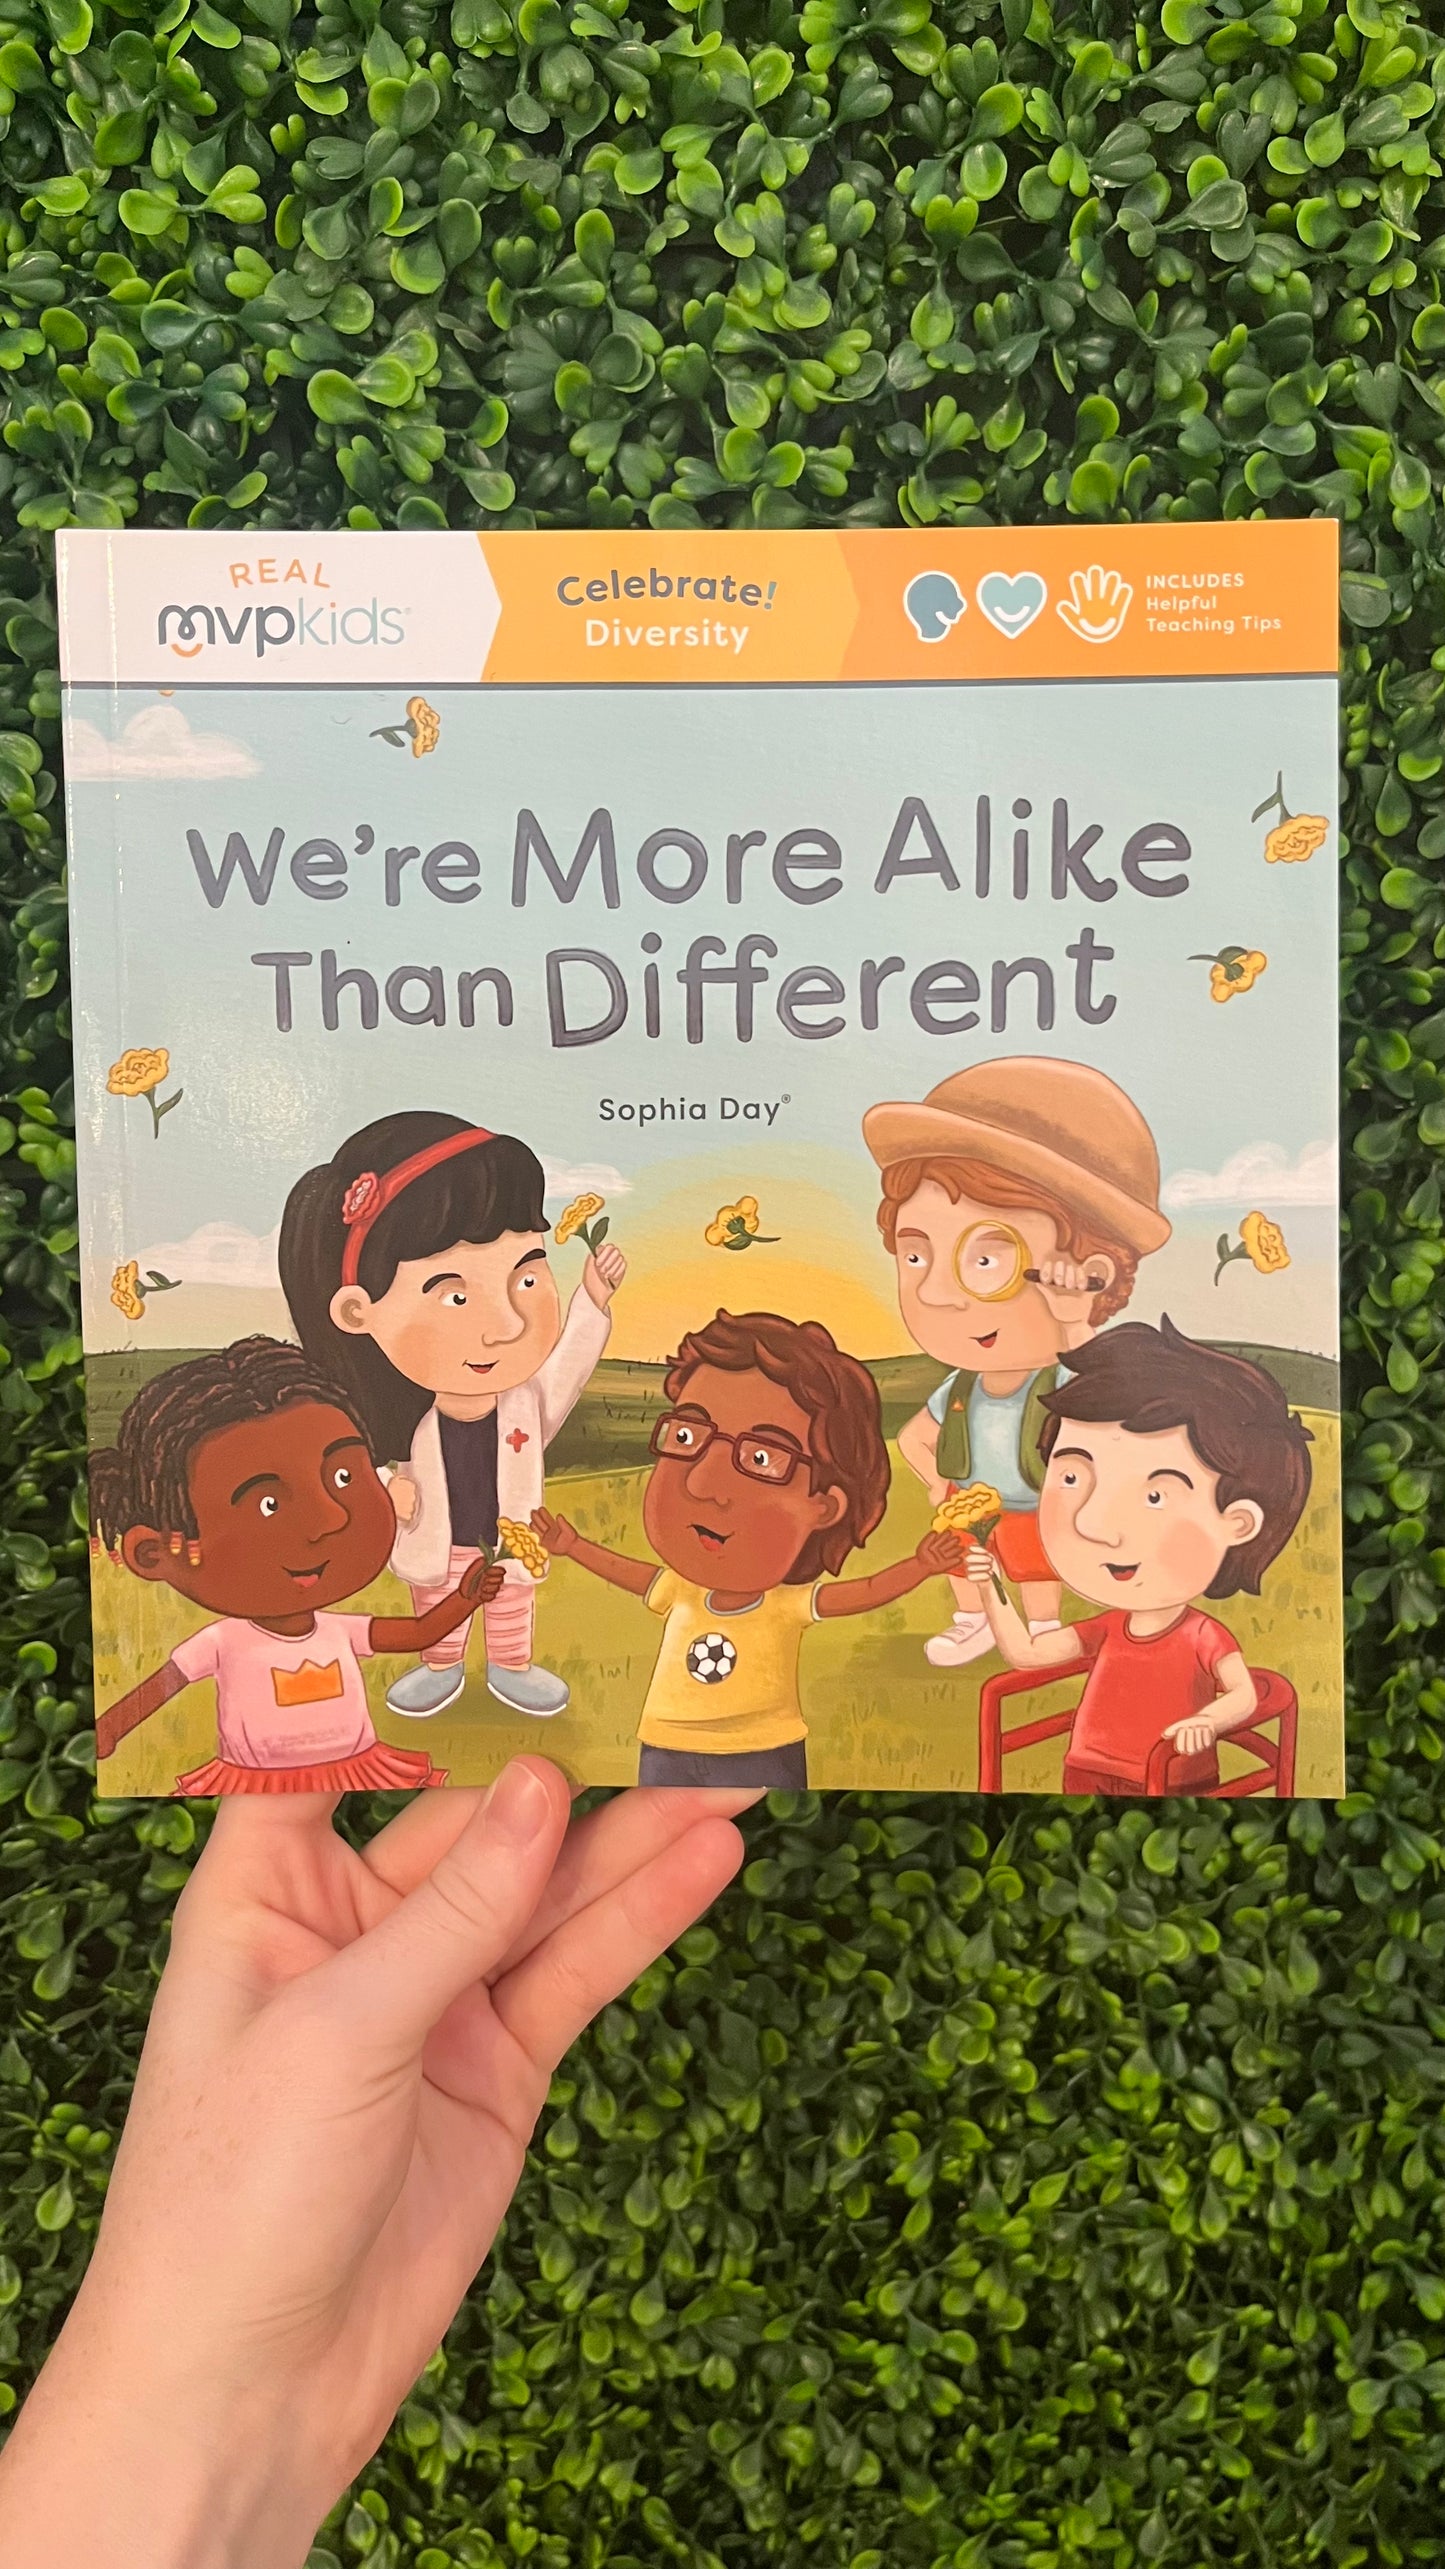 MVP Kids book “We’re More Alike Than Different”